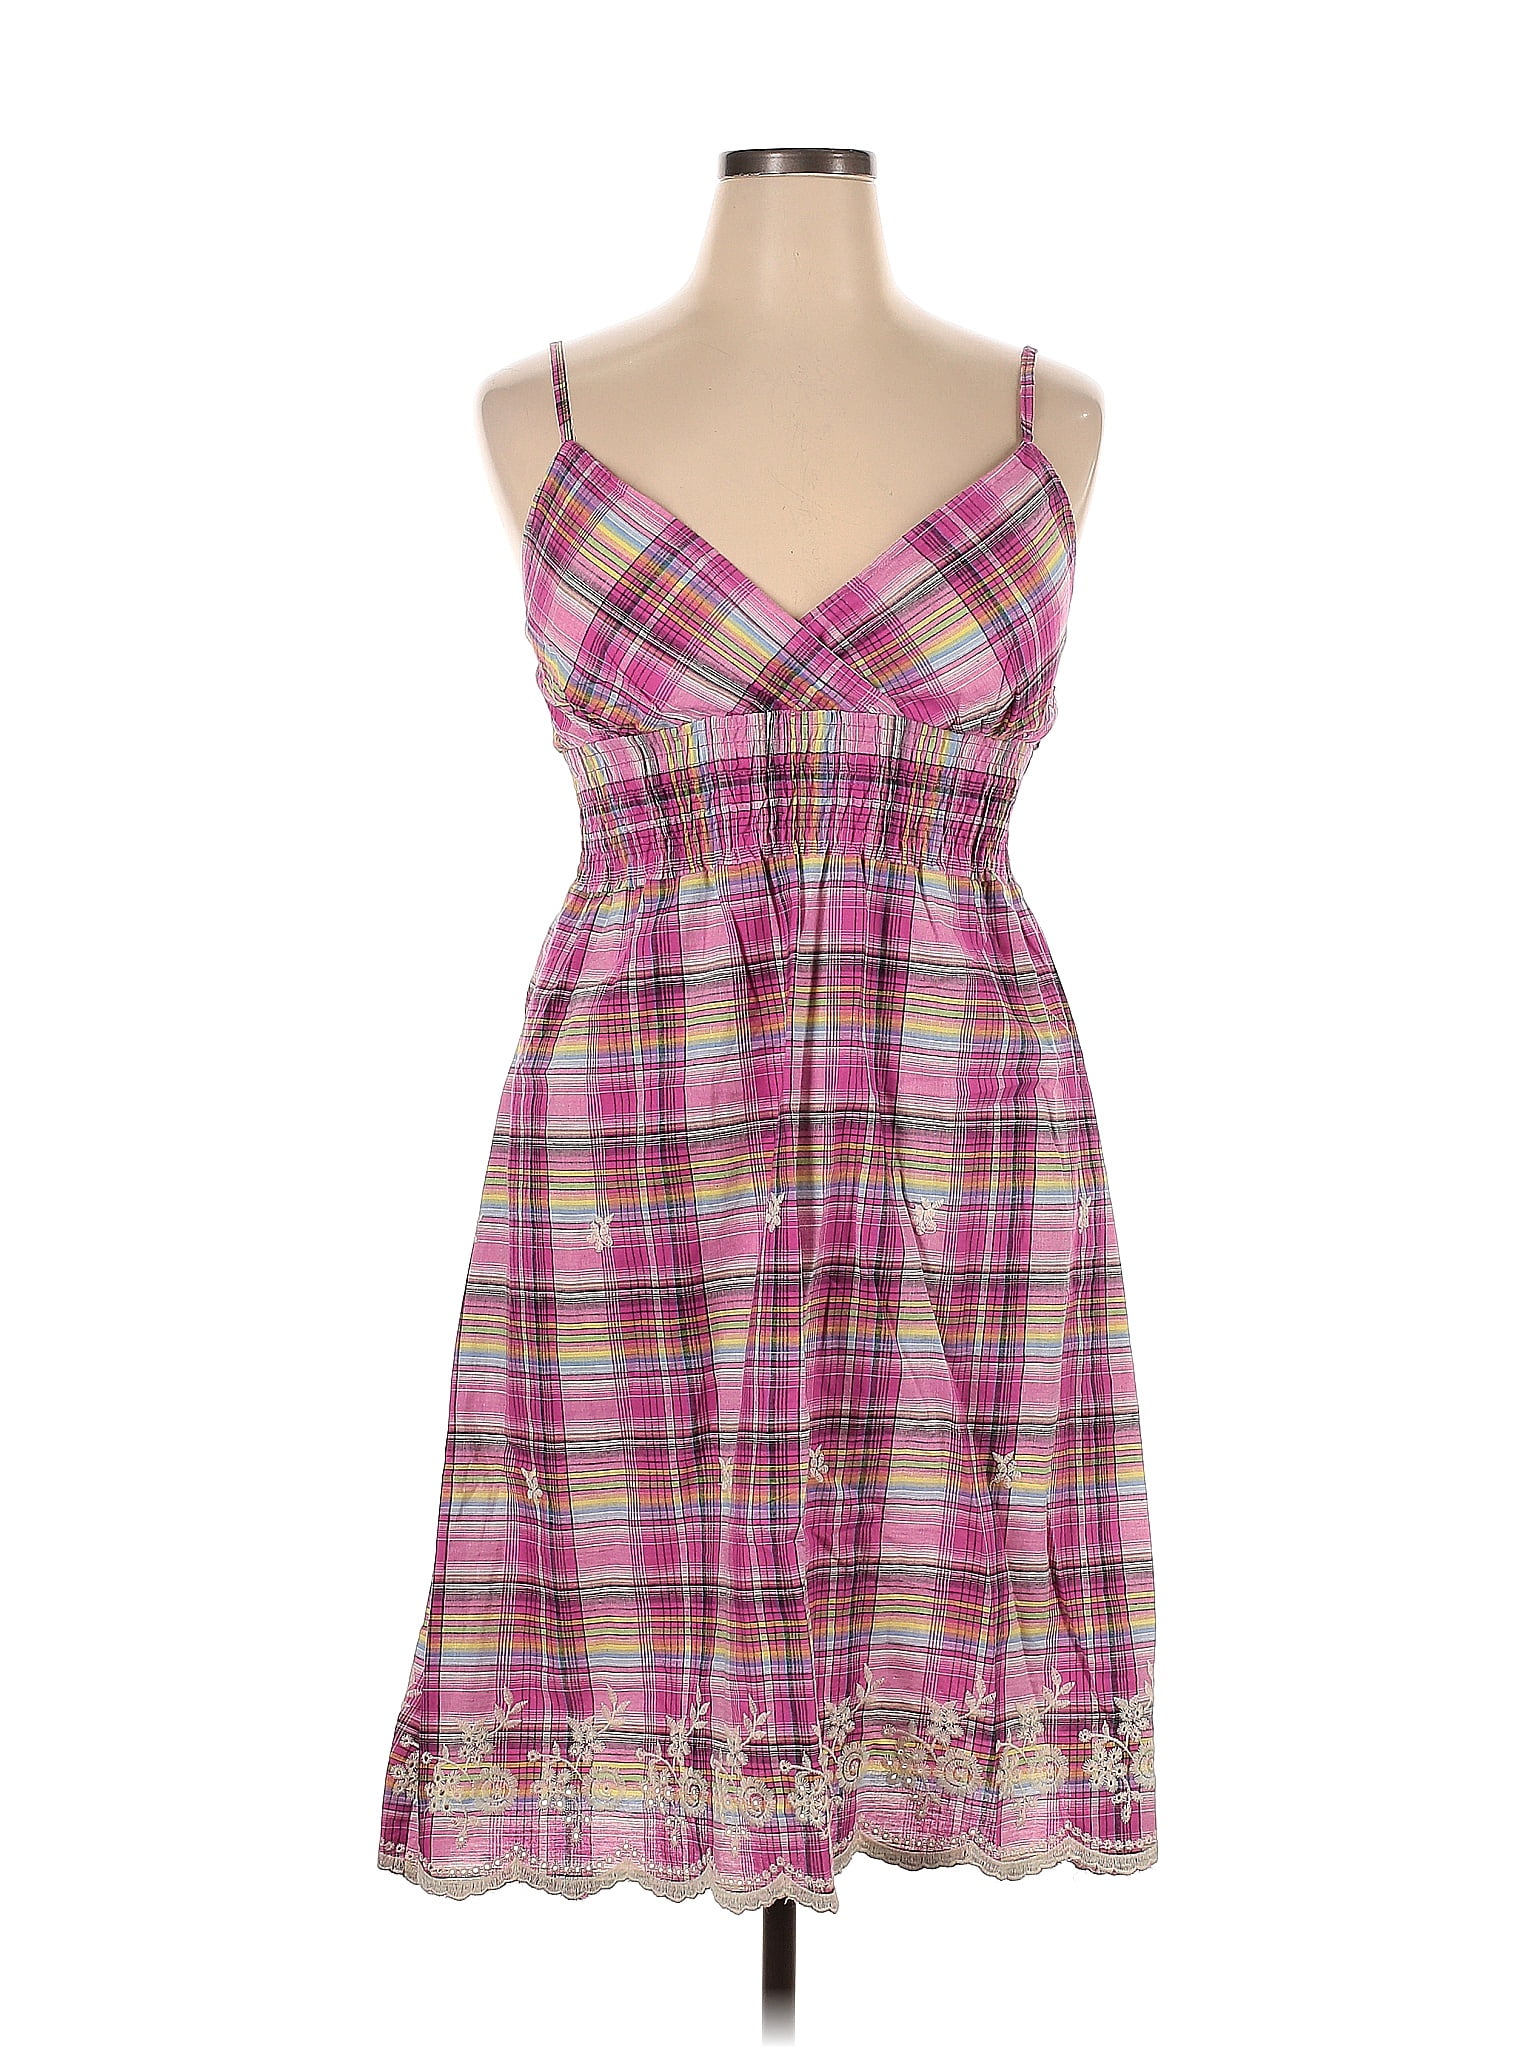 Assorted Brands Plaid Multi Color Pink Casual Dress Size 1X (Plus) - 52%  off